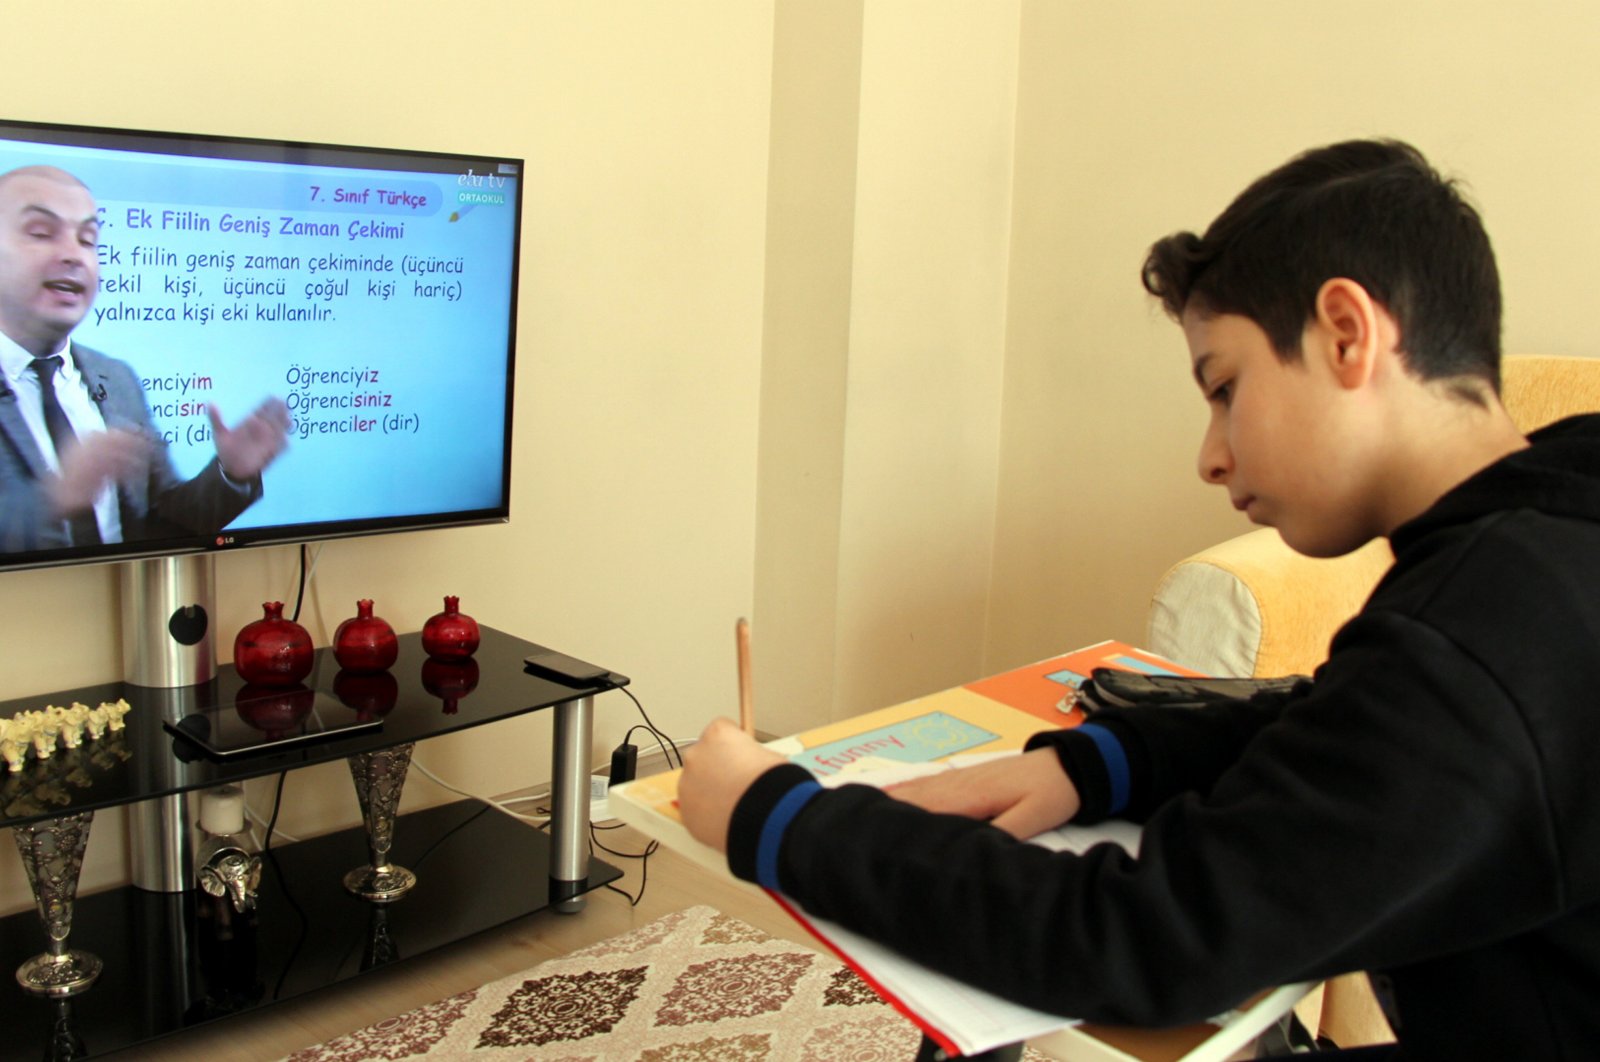 A student takes notes as he watches a remote education program, in Elazığ, Turkey, in this undated photo. (AA Photo)